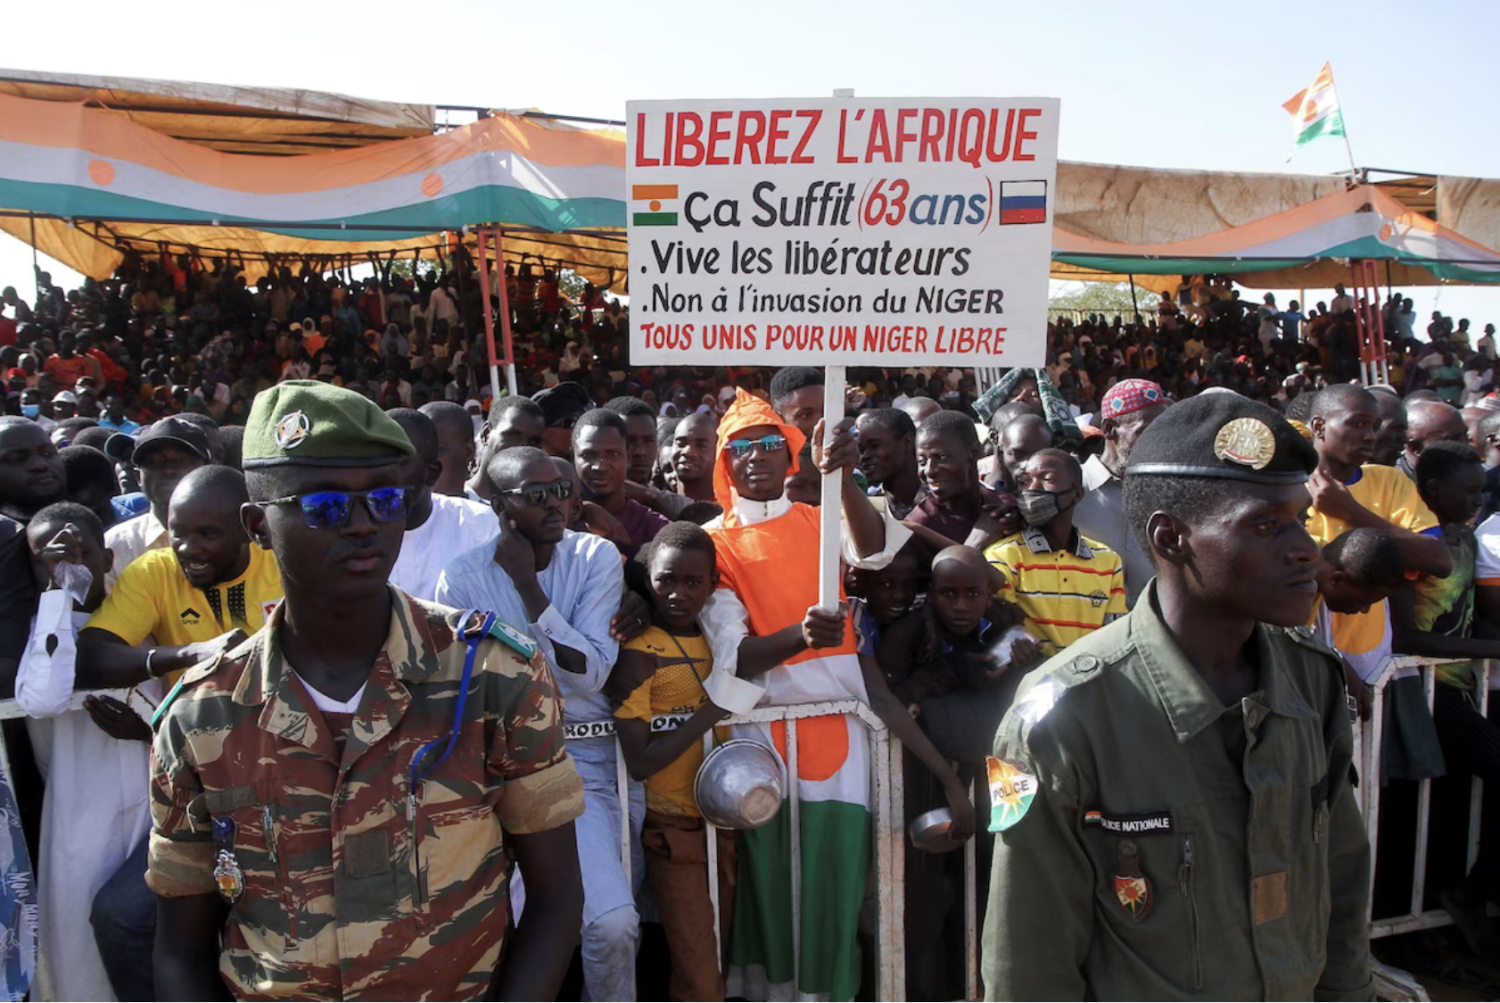 People in Niger's capital, Niamey, gather at a sit-in alongside the prime ministers of Niger, Mali and Burkina Faso to protest “foreign interference” in the Sahel region on Dec. 29. (Hamidou Moussa/Reuters)